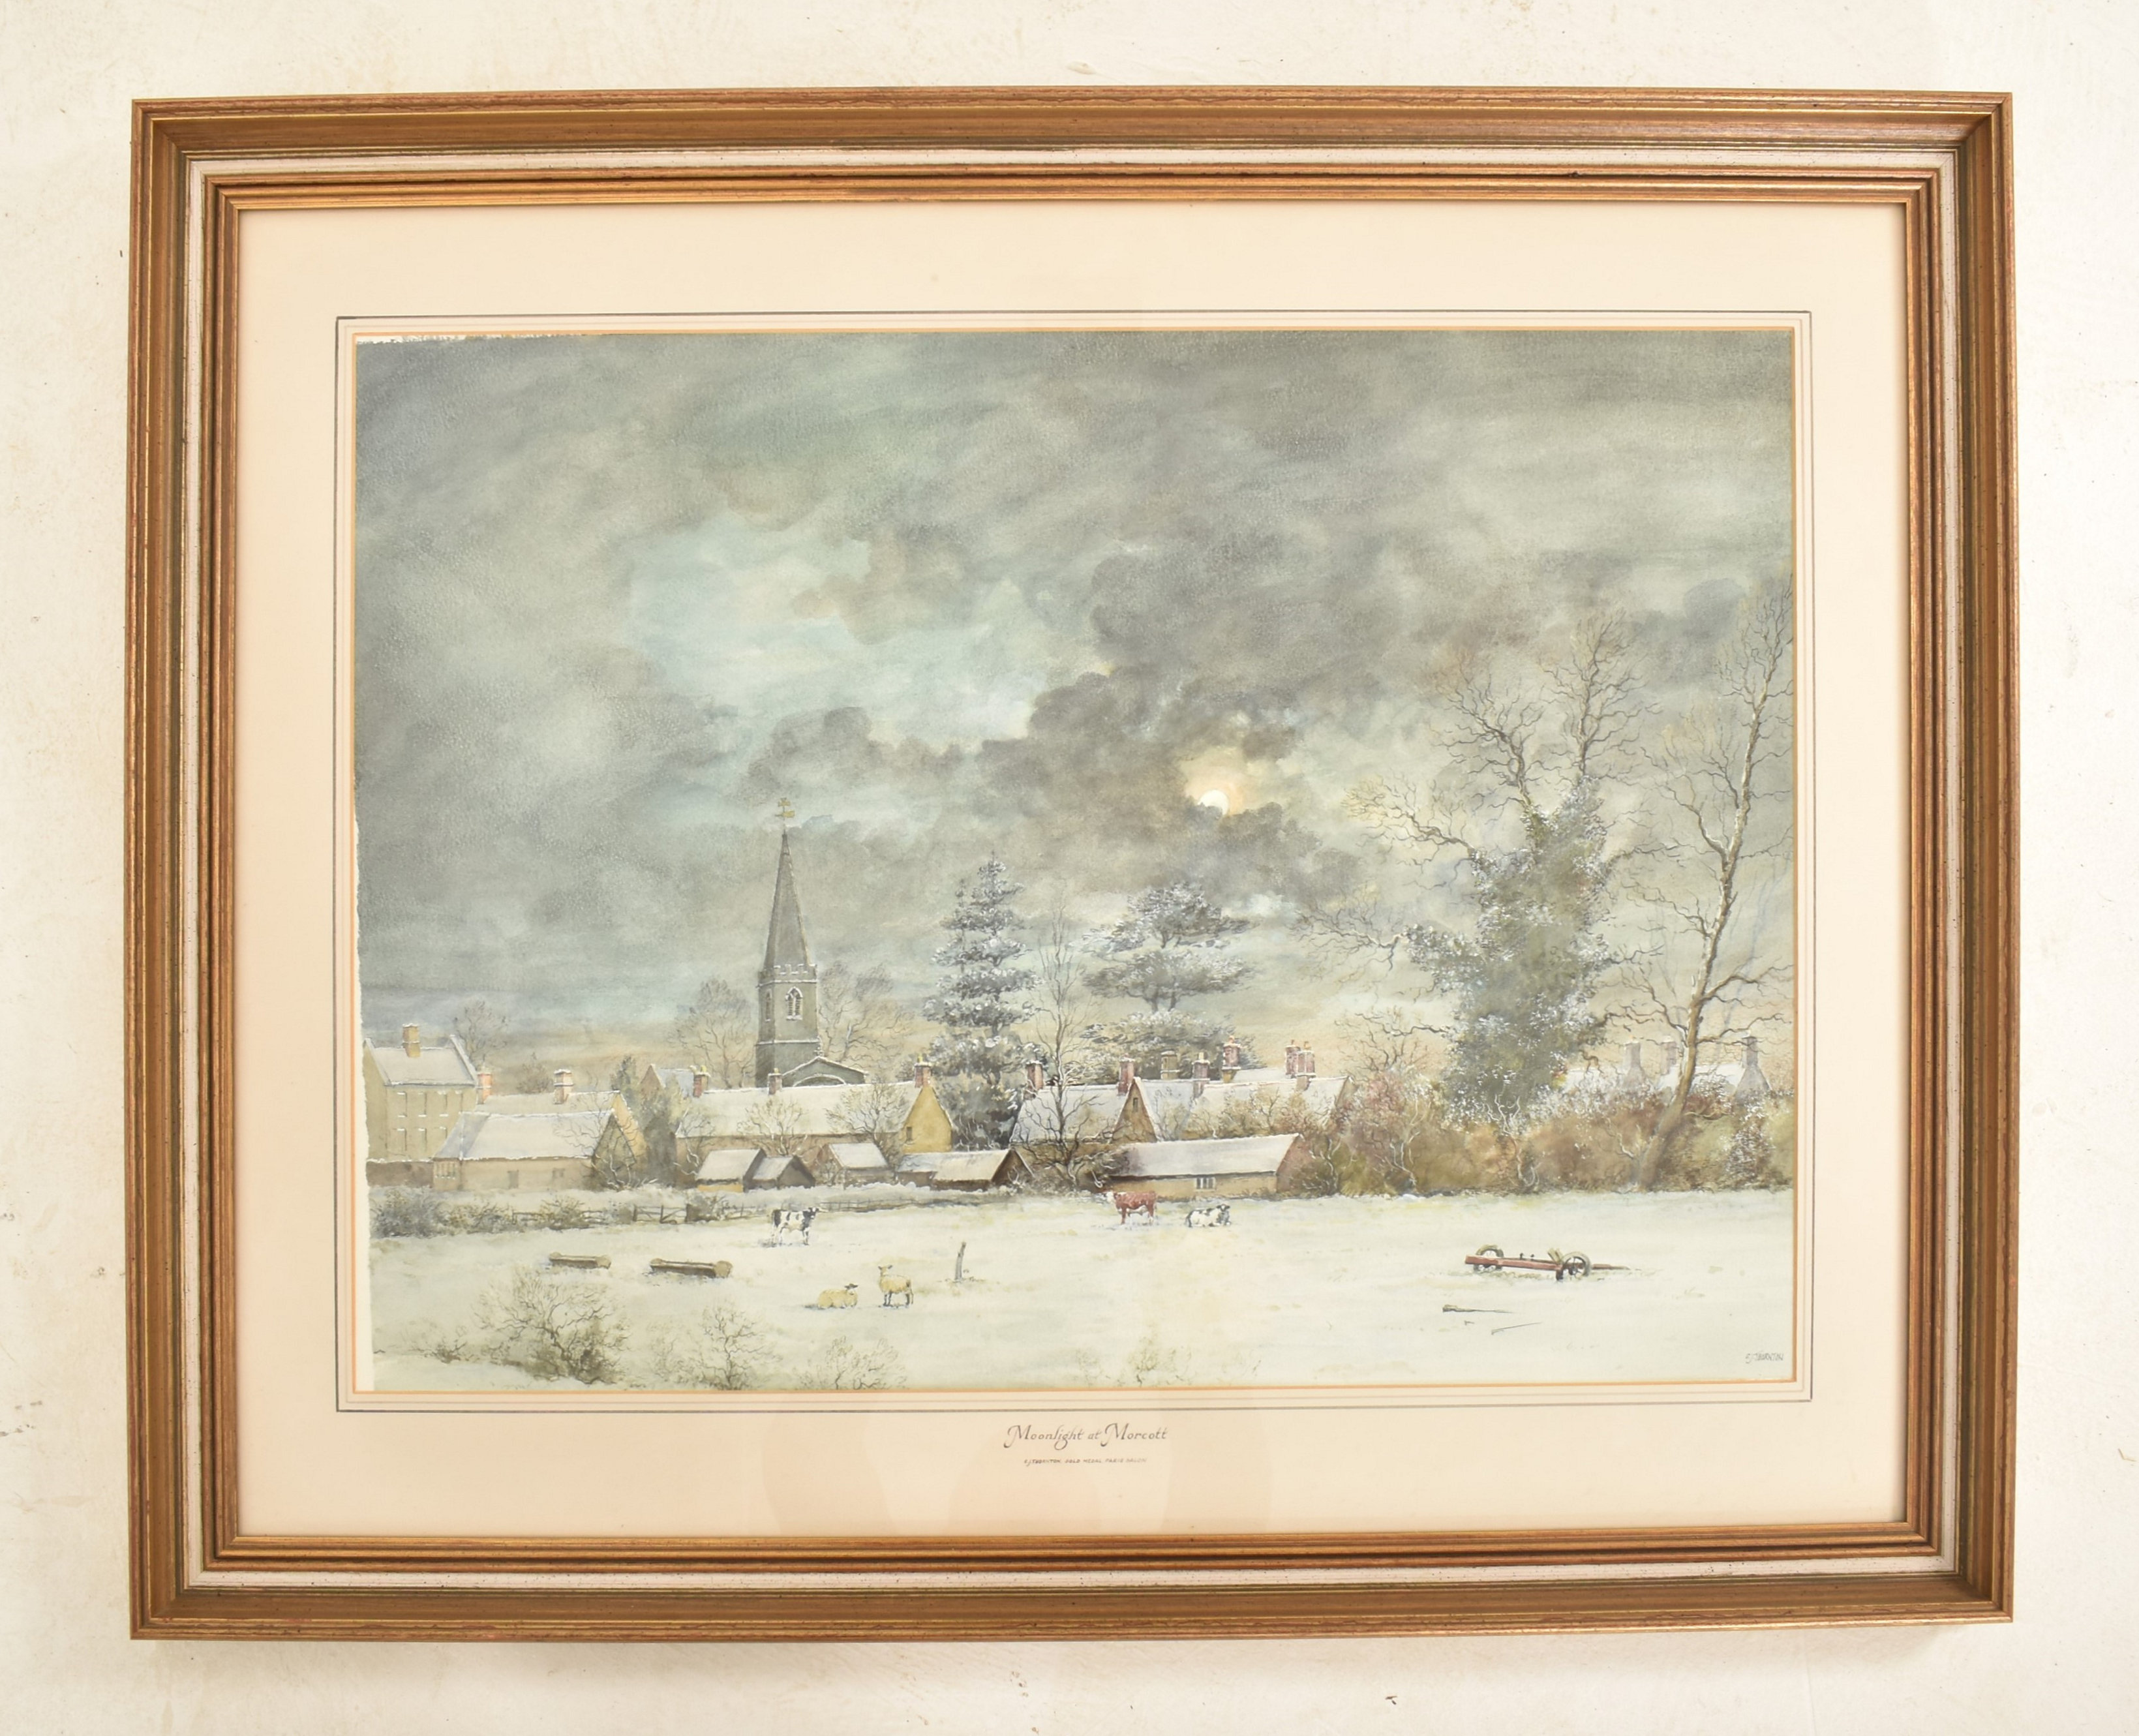 C. J. THORNTON - MOONLIGHT AT MORCOTTE - Image 2 of 5